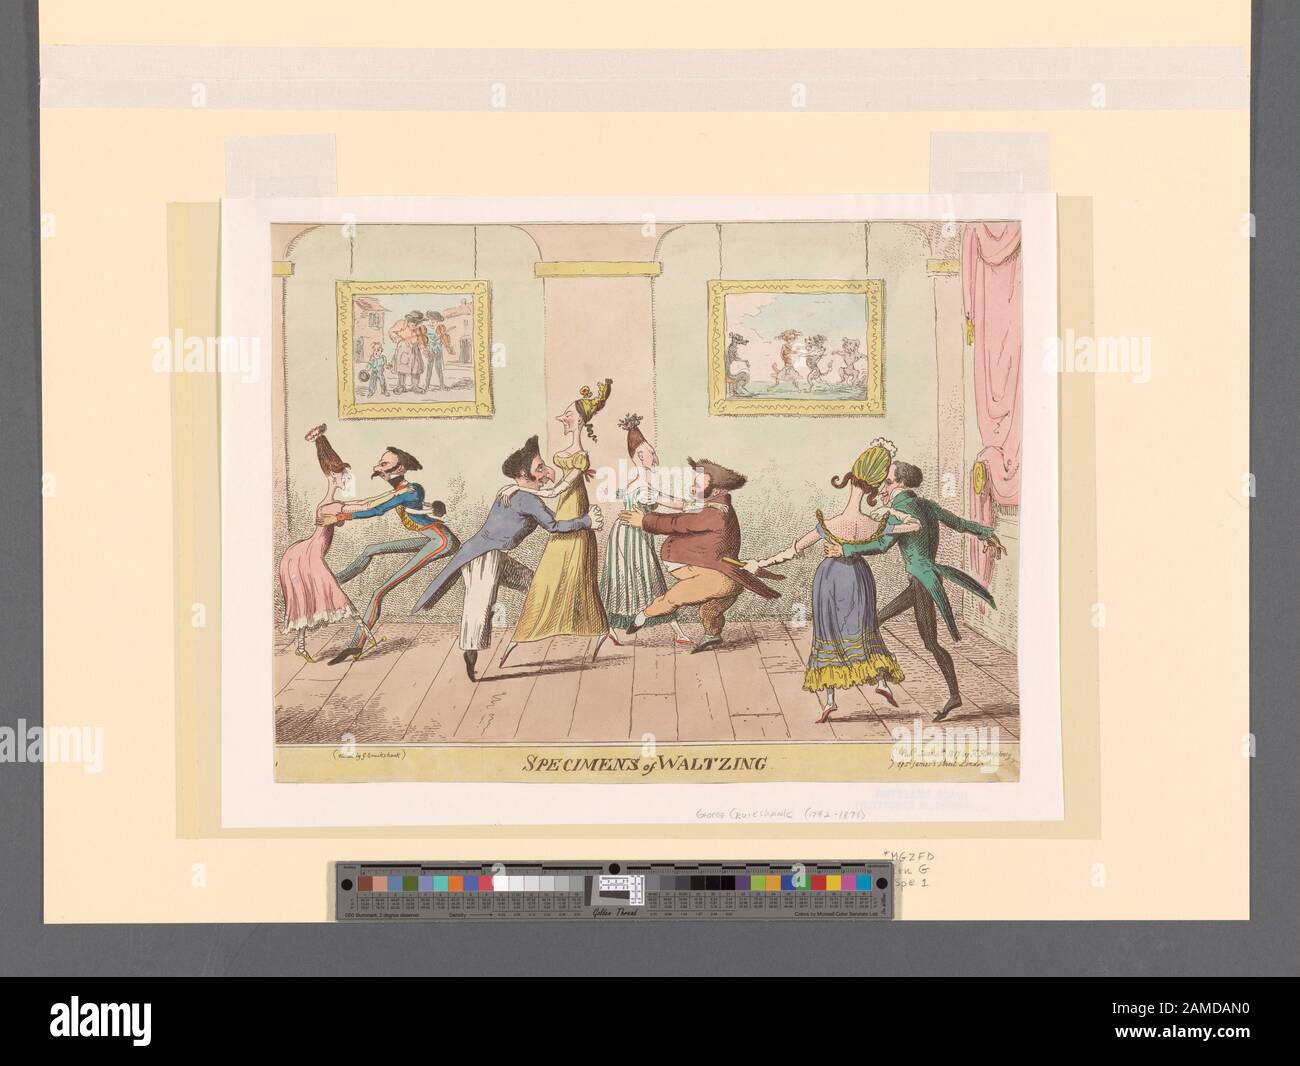 Specimens of waltzing  Caricature, possibly depicting the interior of a dancing school. Four couples, composed of singularly unattractive men and women, practice the waltz. The men dance with their arms around the women's waist; the women perform the dance with their hands resting on their partners' shoulders. There are two paintings on the back wall. The painting at left depicts two itinerant musicians playing fiddles while a young boy begs for coins; the painting at right shows four dancing dogs. Citation/Reference: Reproduced in Dance magazine, April 1951, p. 17.; Specimens of waltzing Stock Photo